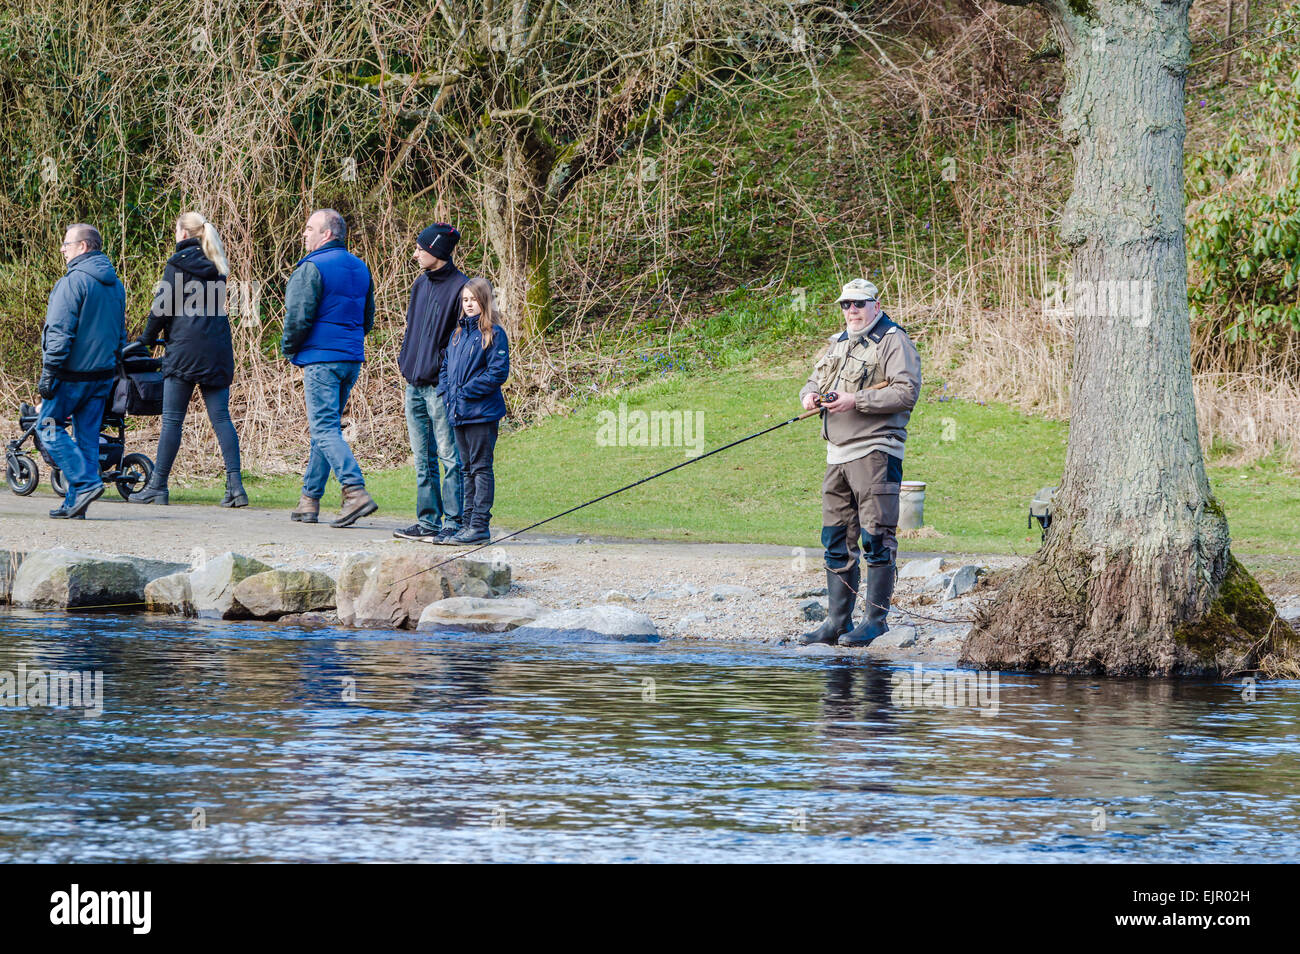 Morrum, Sweden - March 28, 2015: Premiere day for trout and salmon fishing. Spectators walk by and look while people fish. Stock Photo